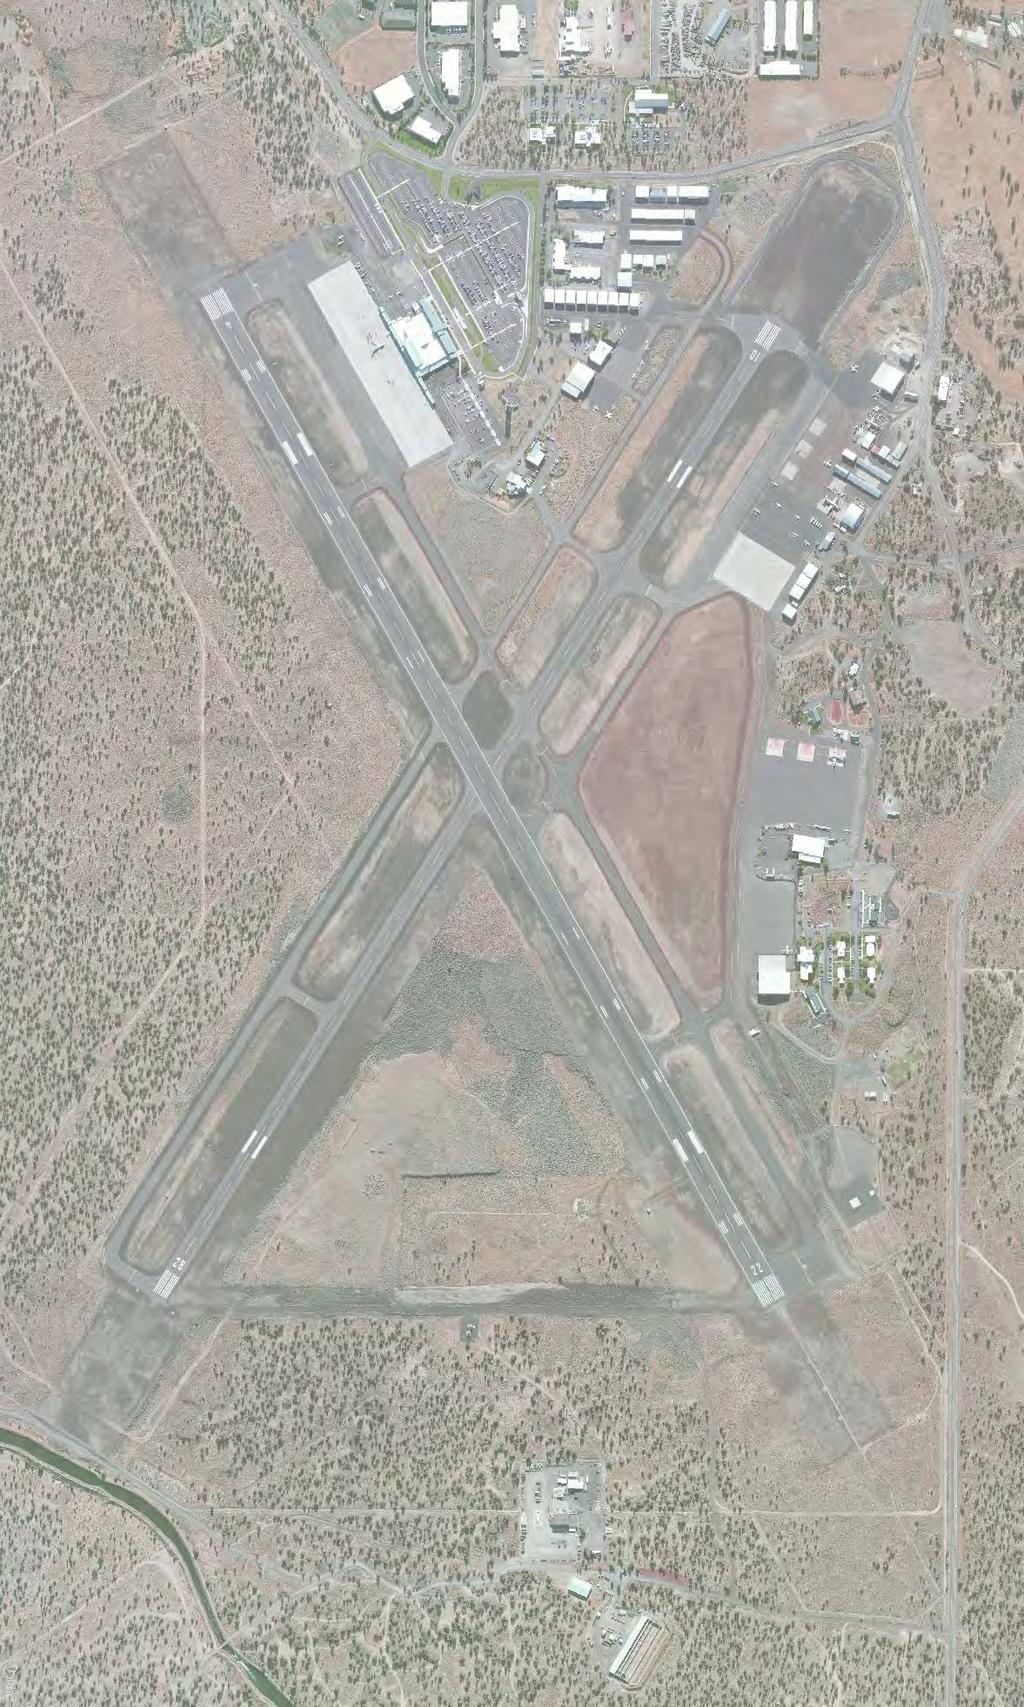 Runway 5-23 airgrounds Industrial Subarea Airport Way Runway 11-29 North Apron South Apron Mountain Pkwy.